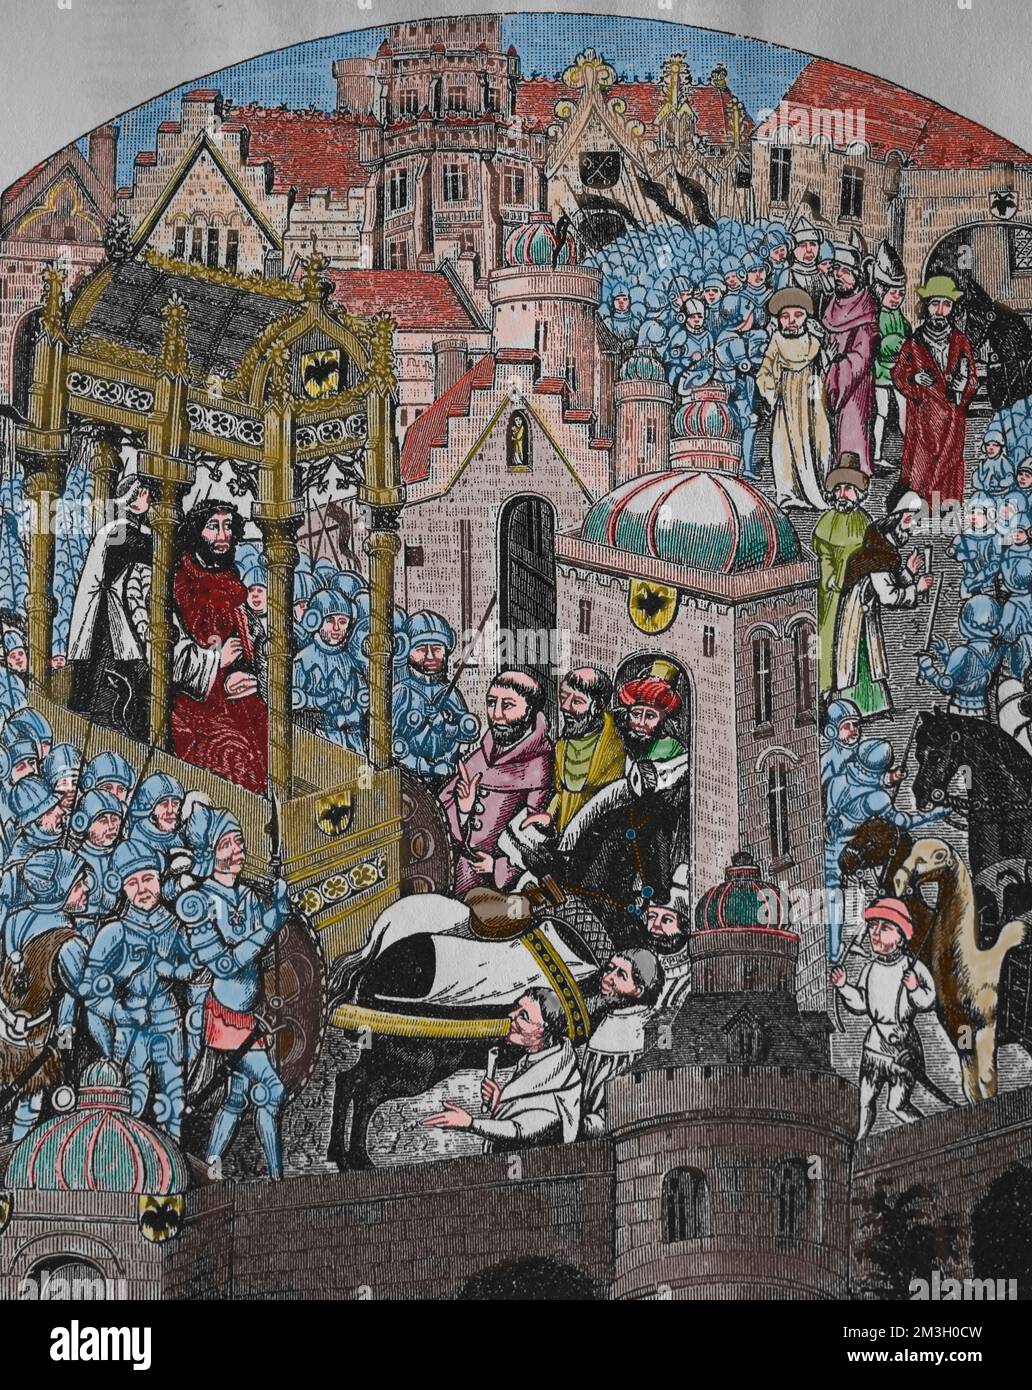 Coronation of Charlemagne in the City of Jerusalem from the 'Chroniques de Charlemagne, 15th century. Stock Photo